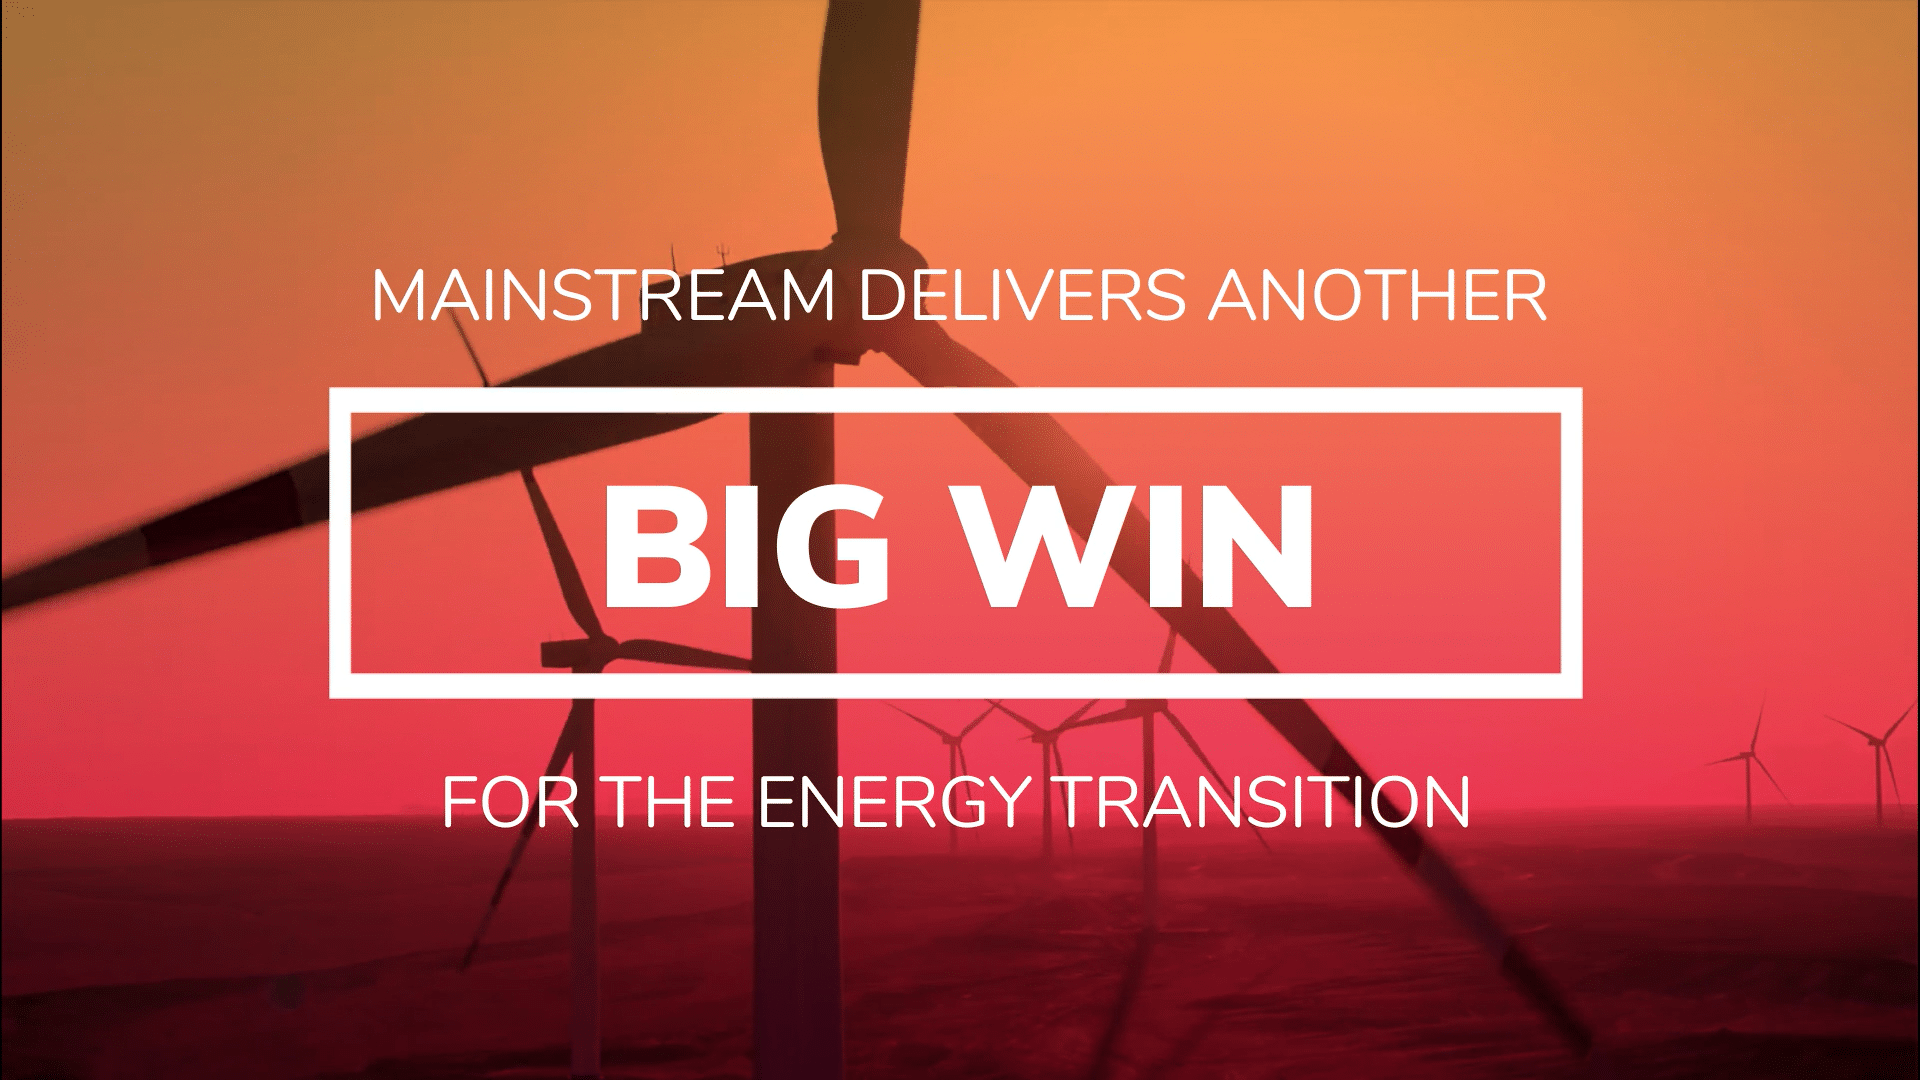 Video title: Mainstream delivers another big win for the energy transition